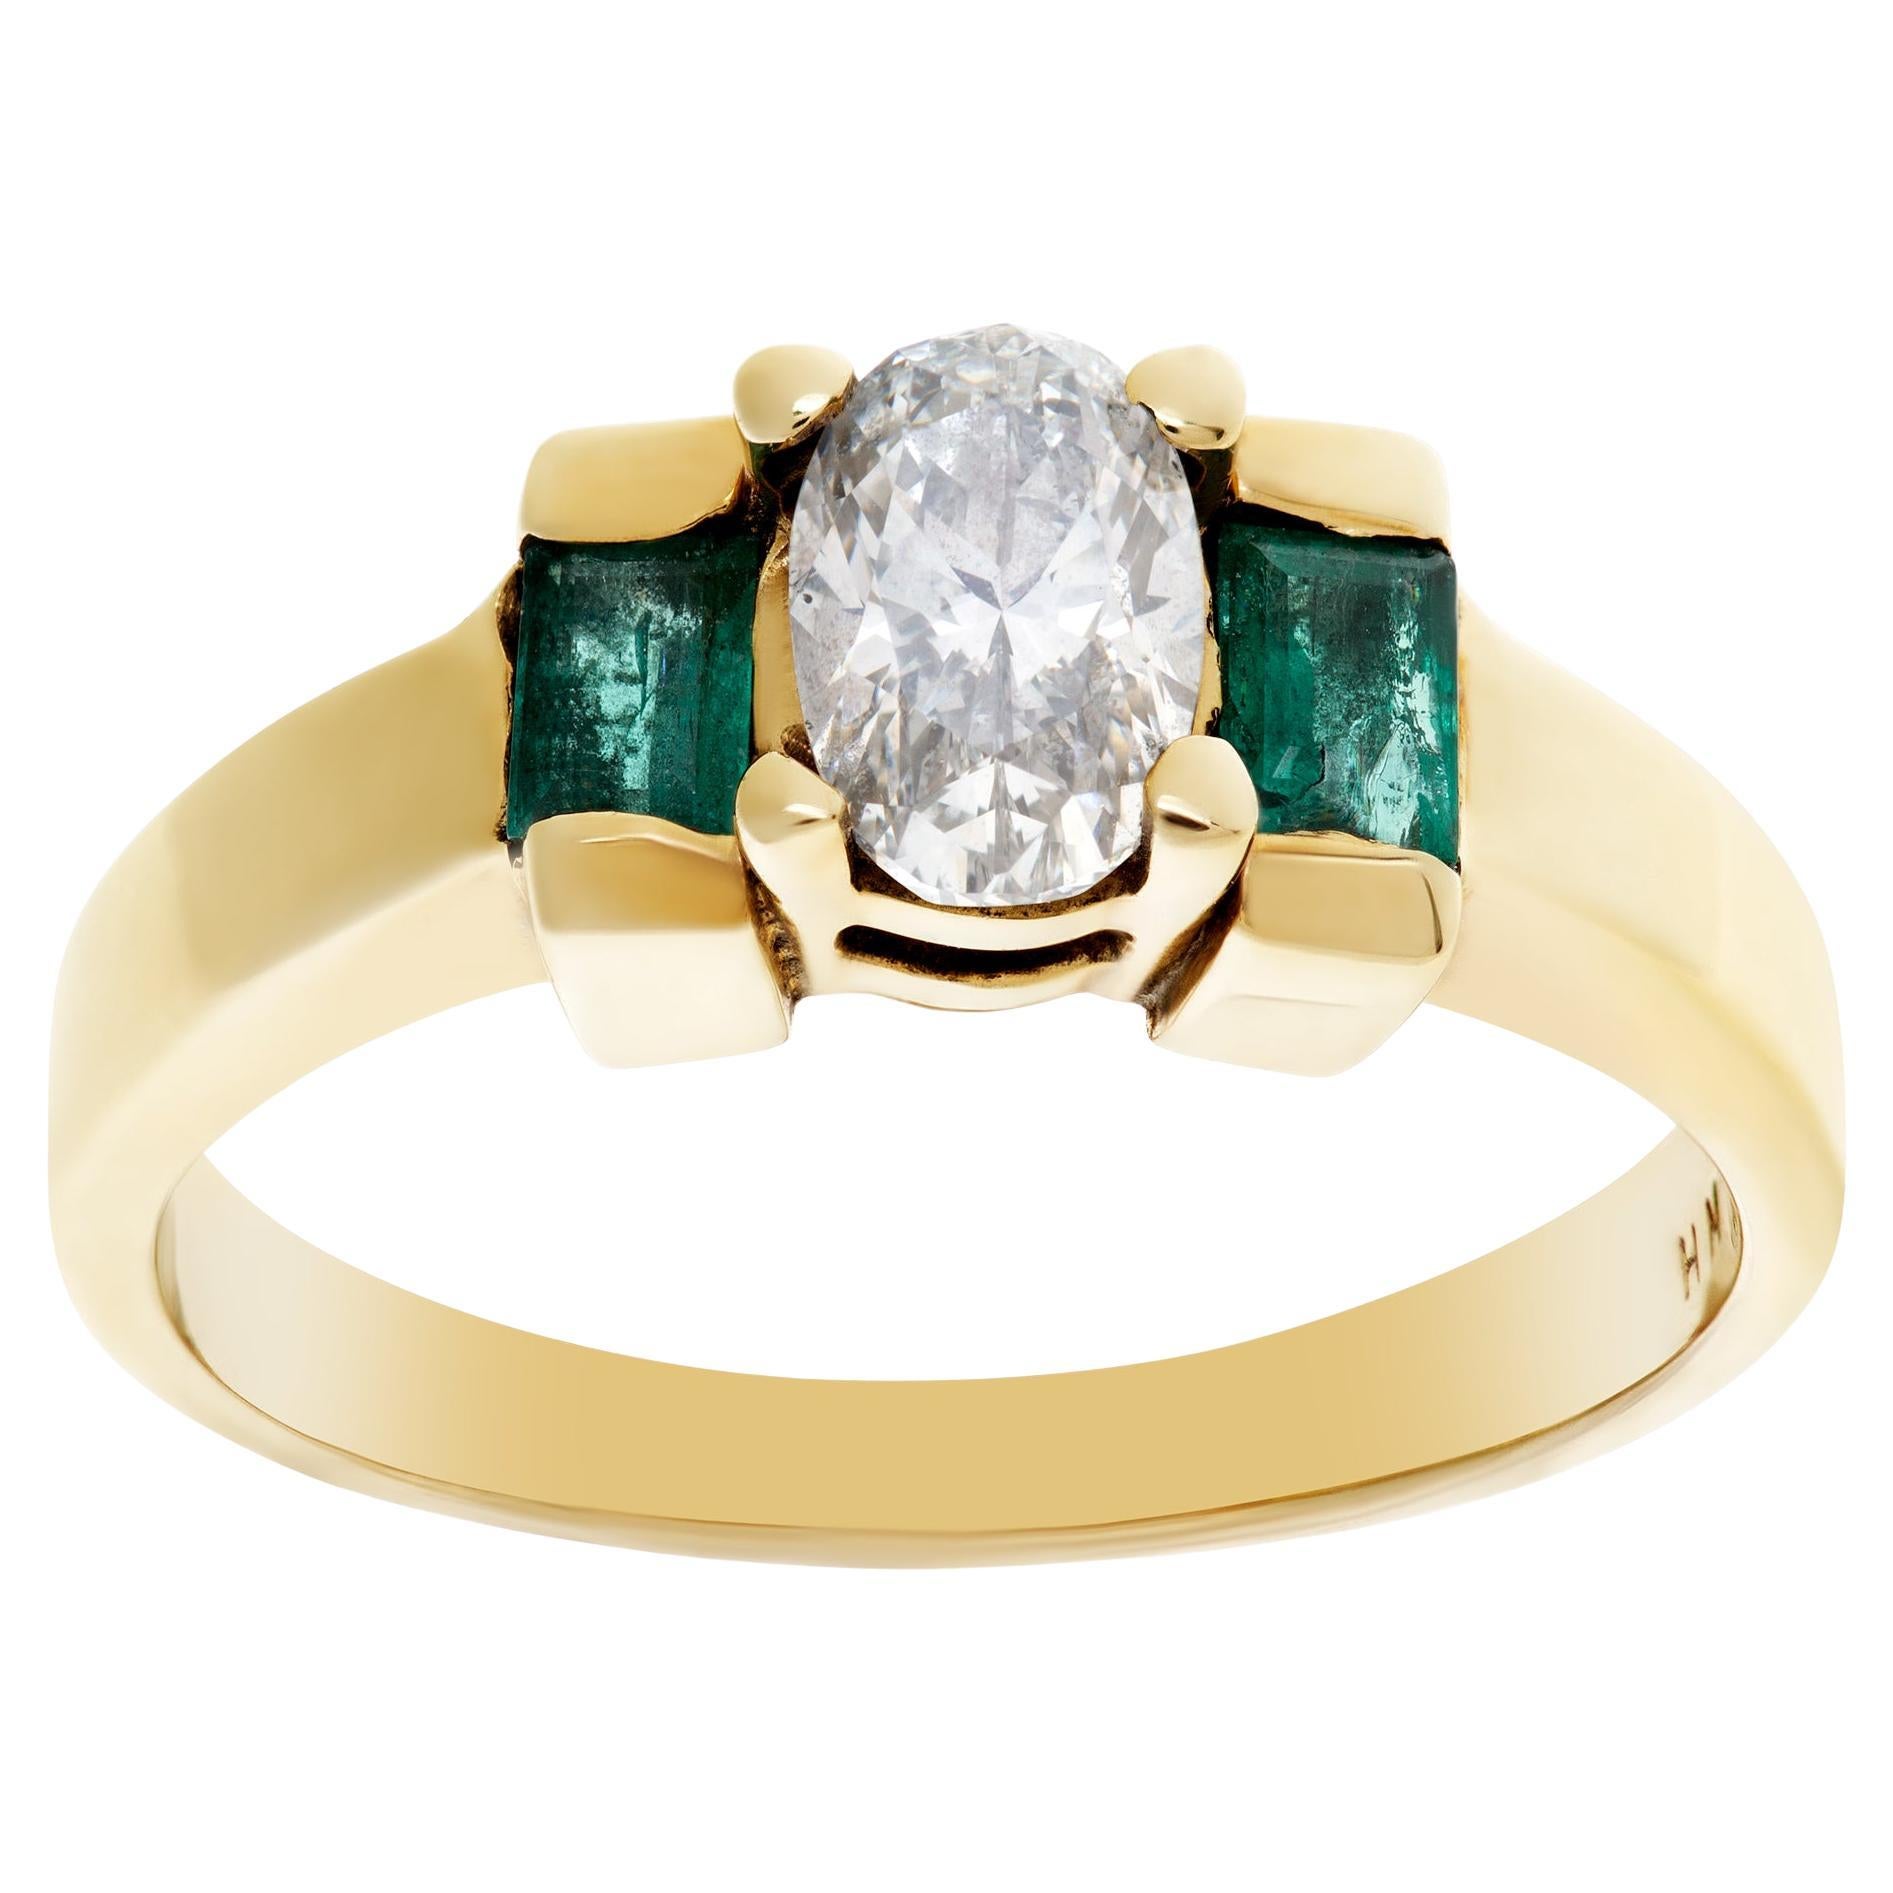 Diamond and Emerald Ring in 14k Gold. 0.50cts Oval Diamond, 'H-I, VS2' For Sale